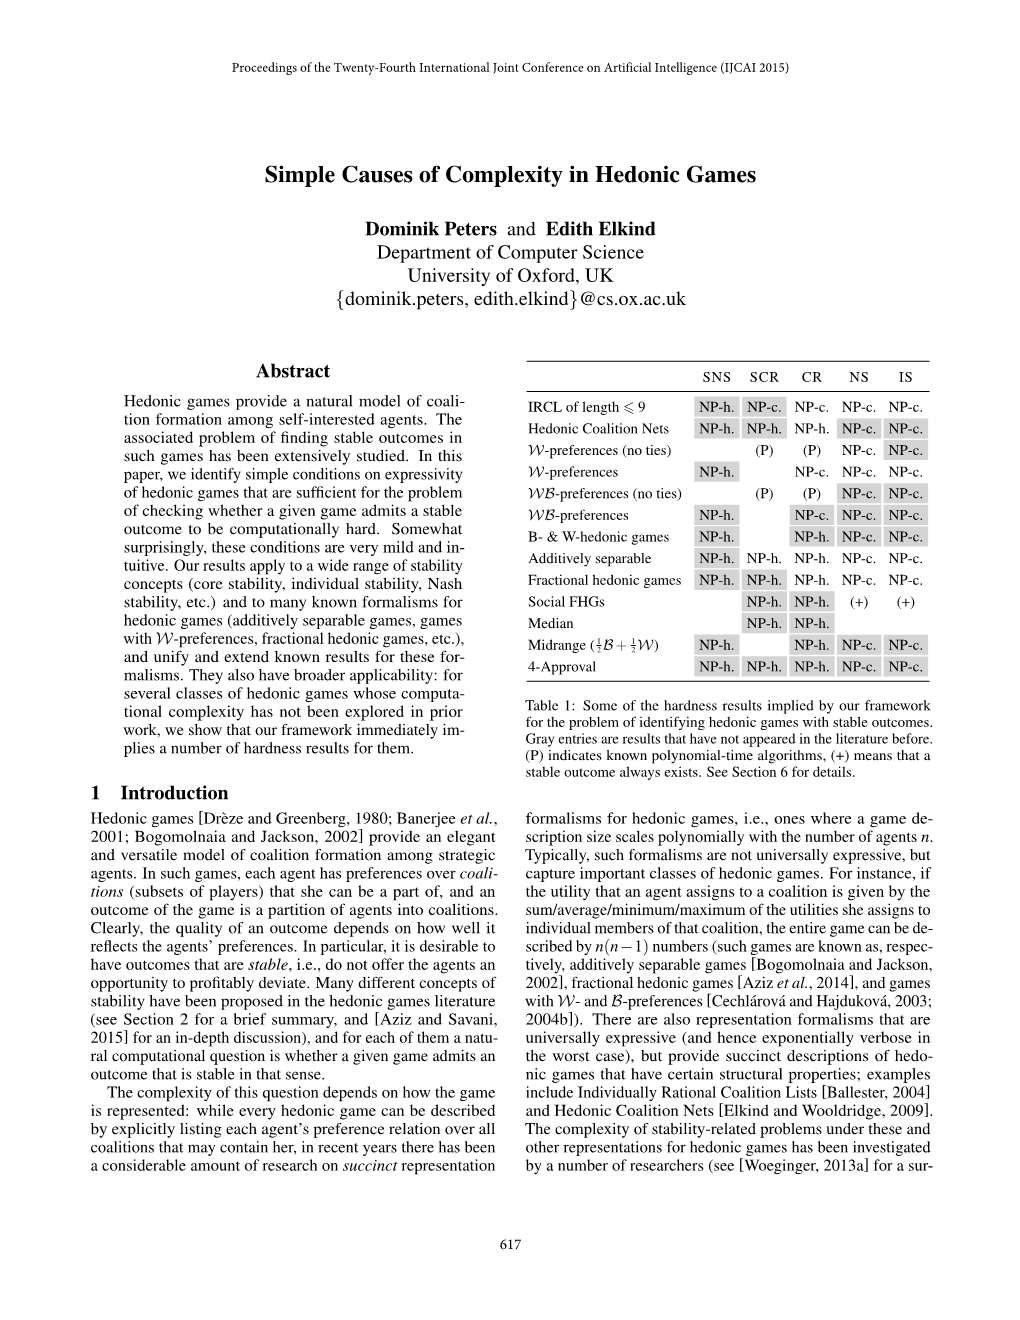 Simple Causes of Complexity in Hedonic Games